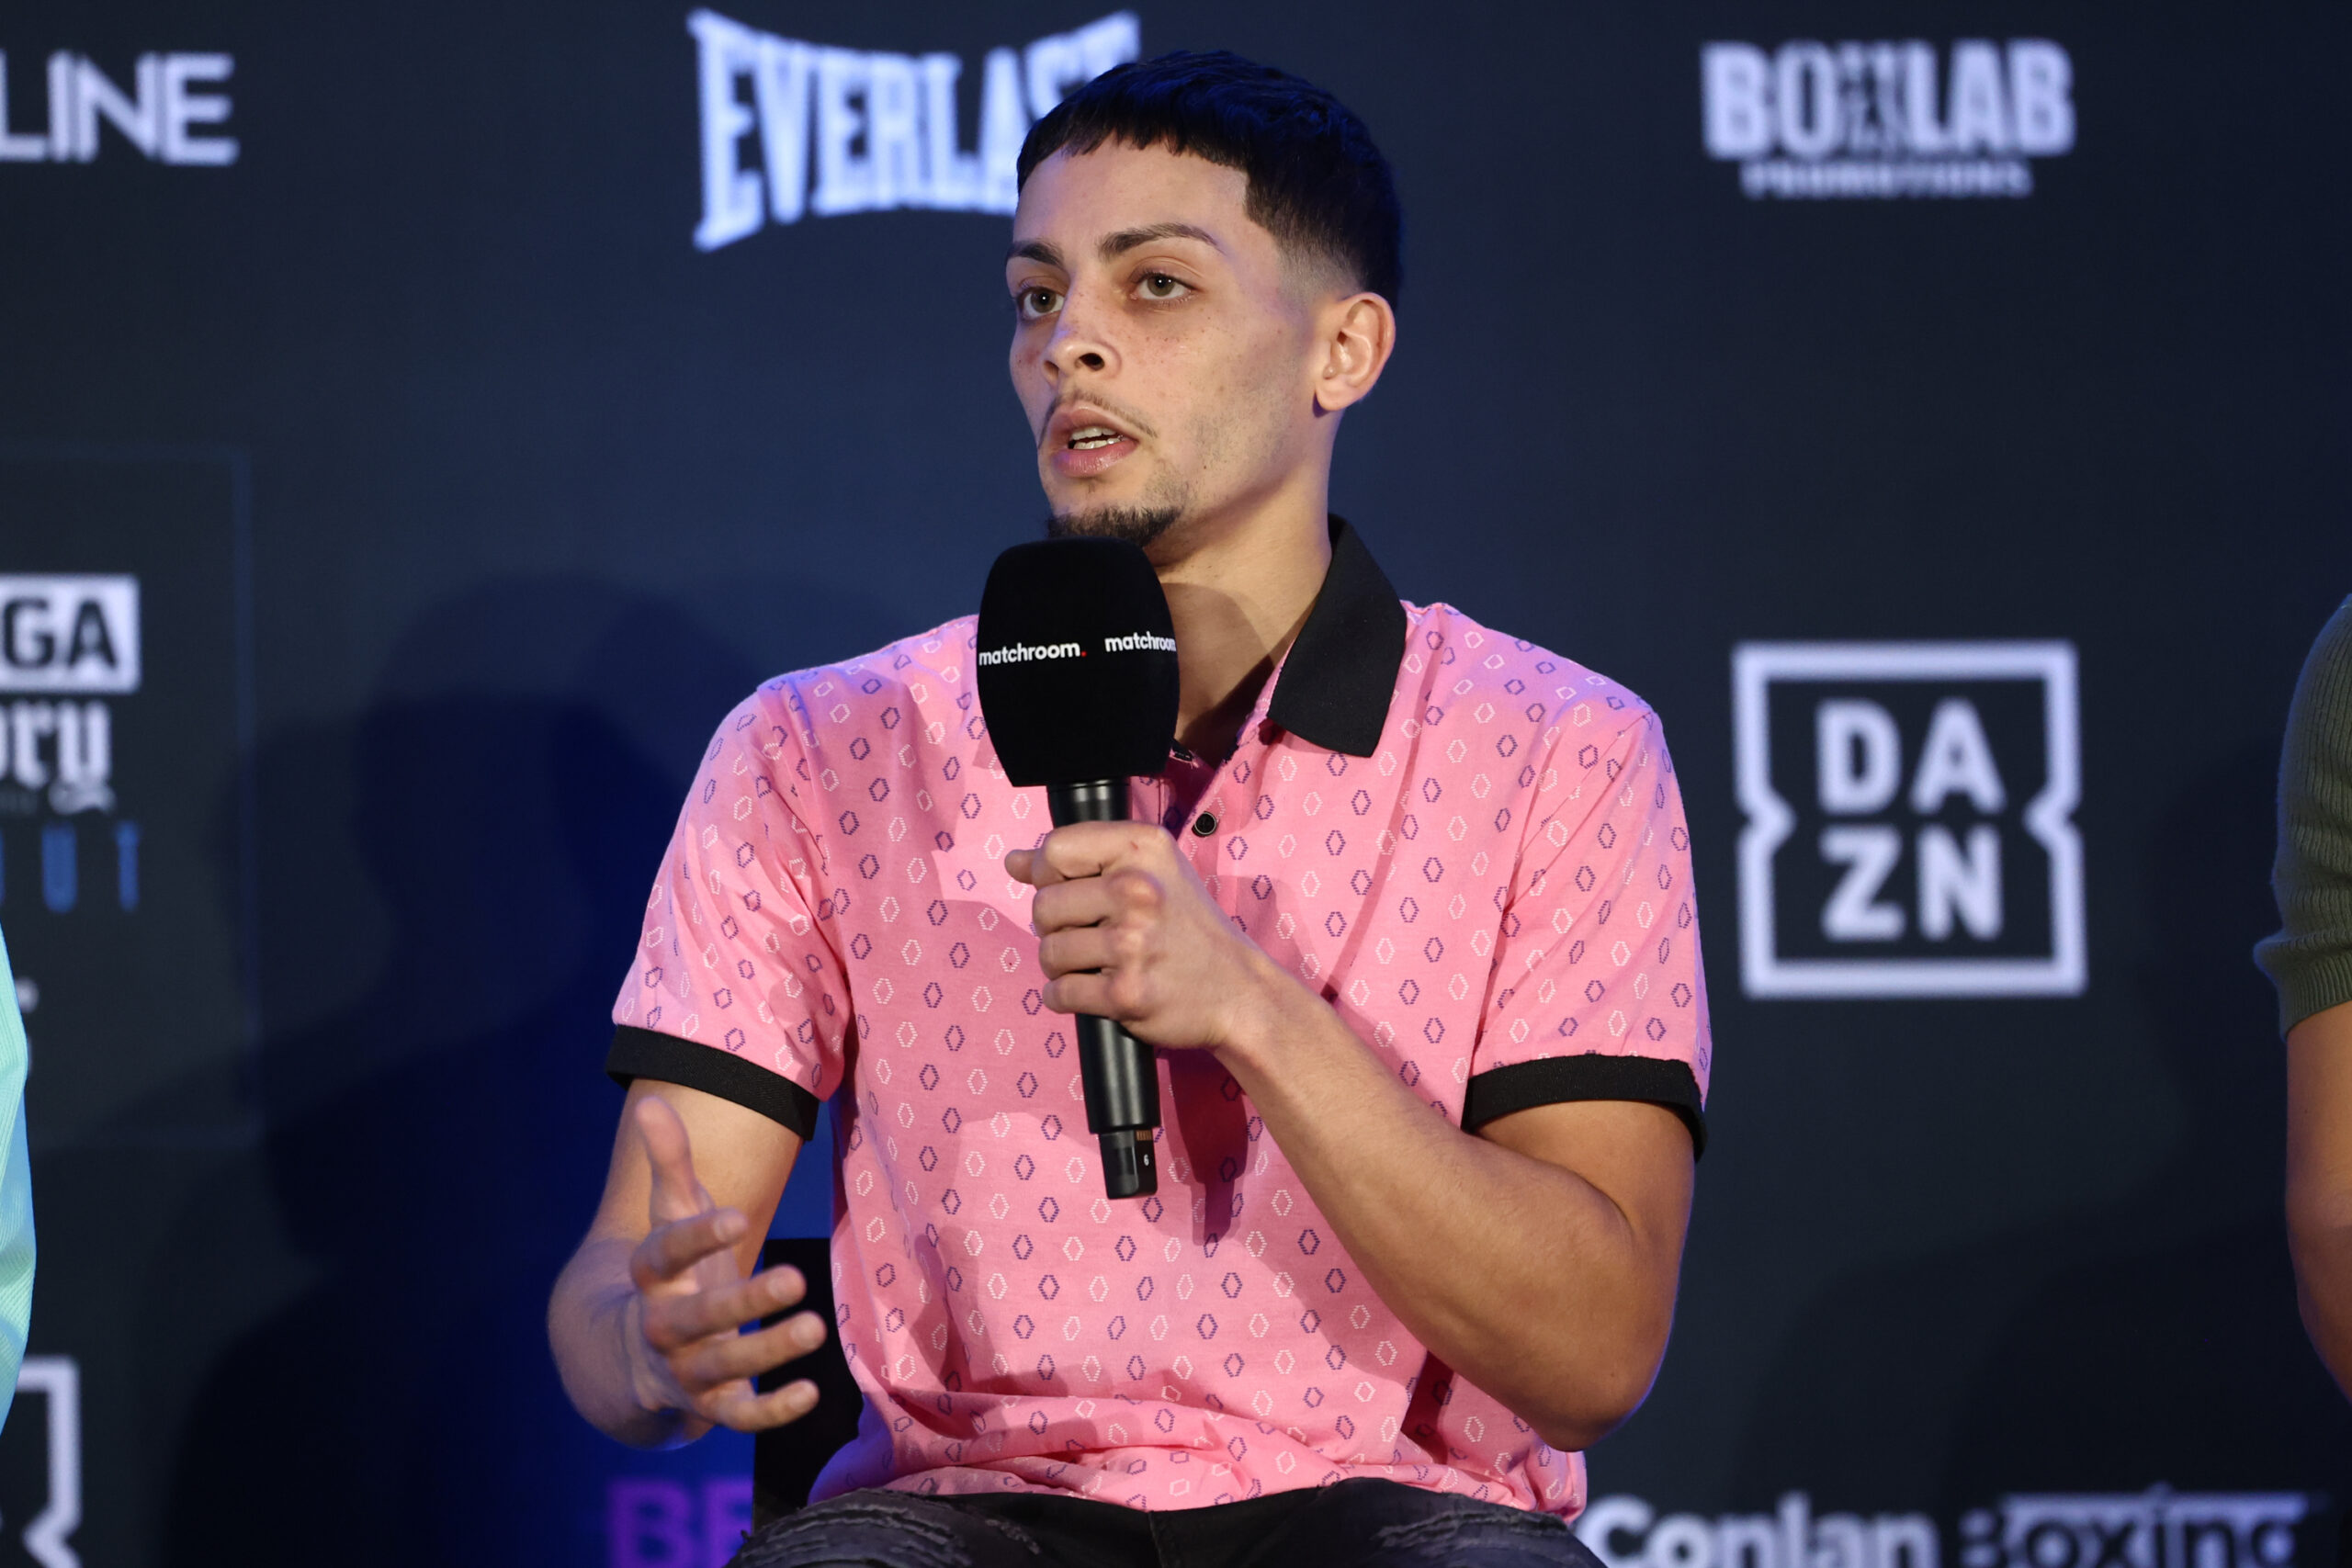 February 22, 2024; Orlando, FL; Jonathan Rodriguez speaks at the final press conference for his February 24, 2024 fight in Orlando, FL. (Foto: Melina Pizano/Matchroom).